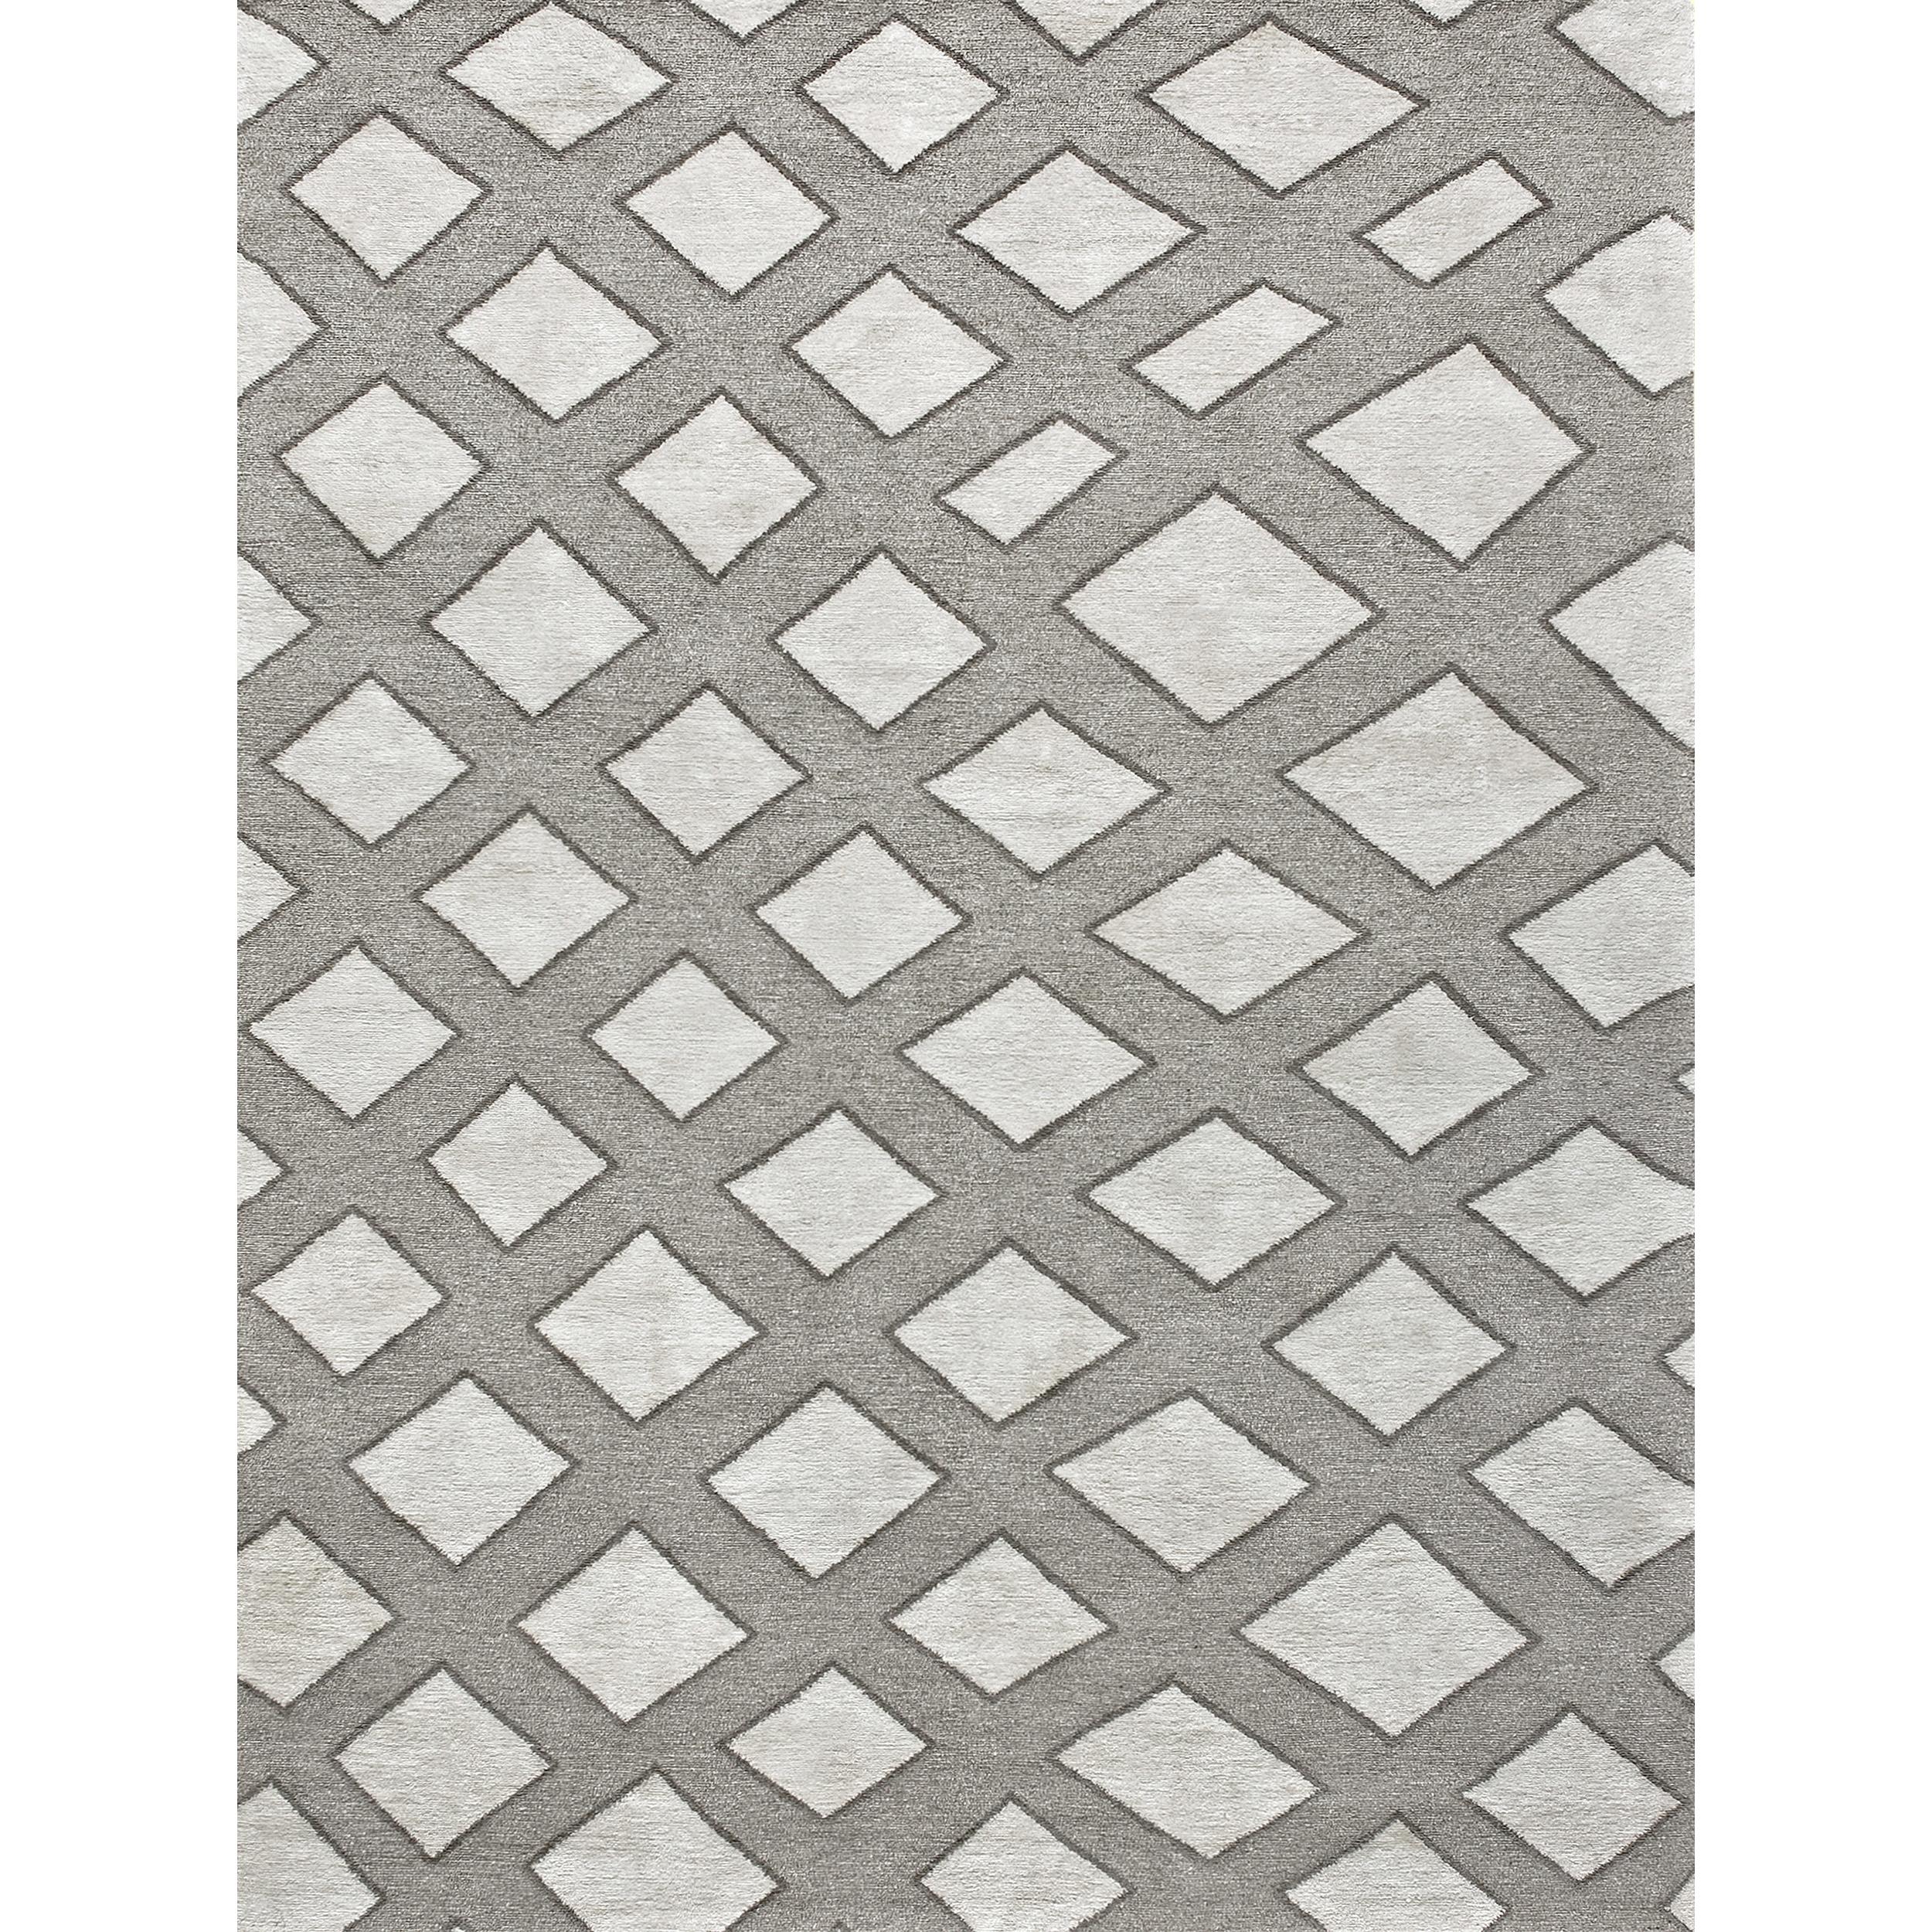 Every inch of this rug is a labor of love, meticulously hand-knotted by skilled artisans in Nepal. The design reflects a modern, abstract motif, which gracefully merges with timeless aesthetics. It blends traditional craftsmanship with contemporary